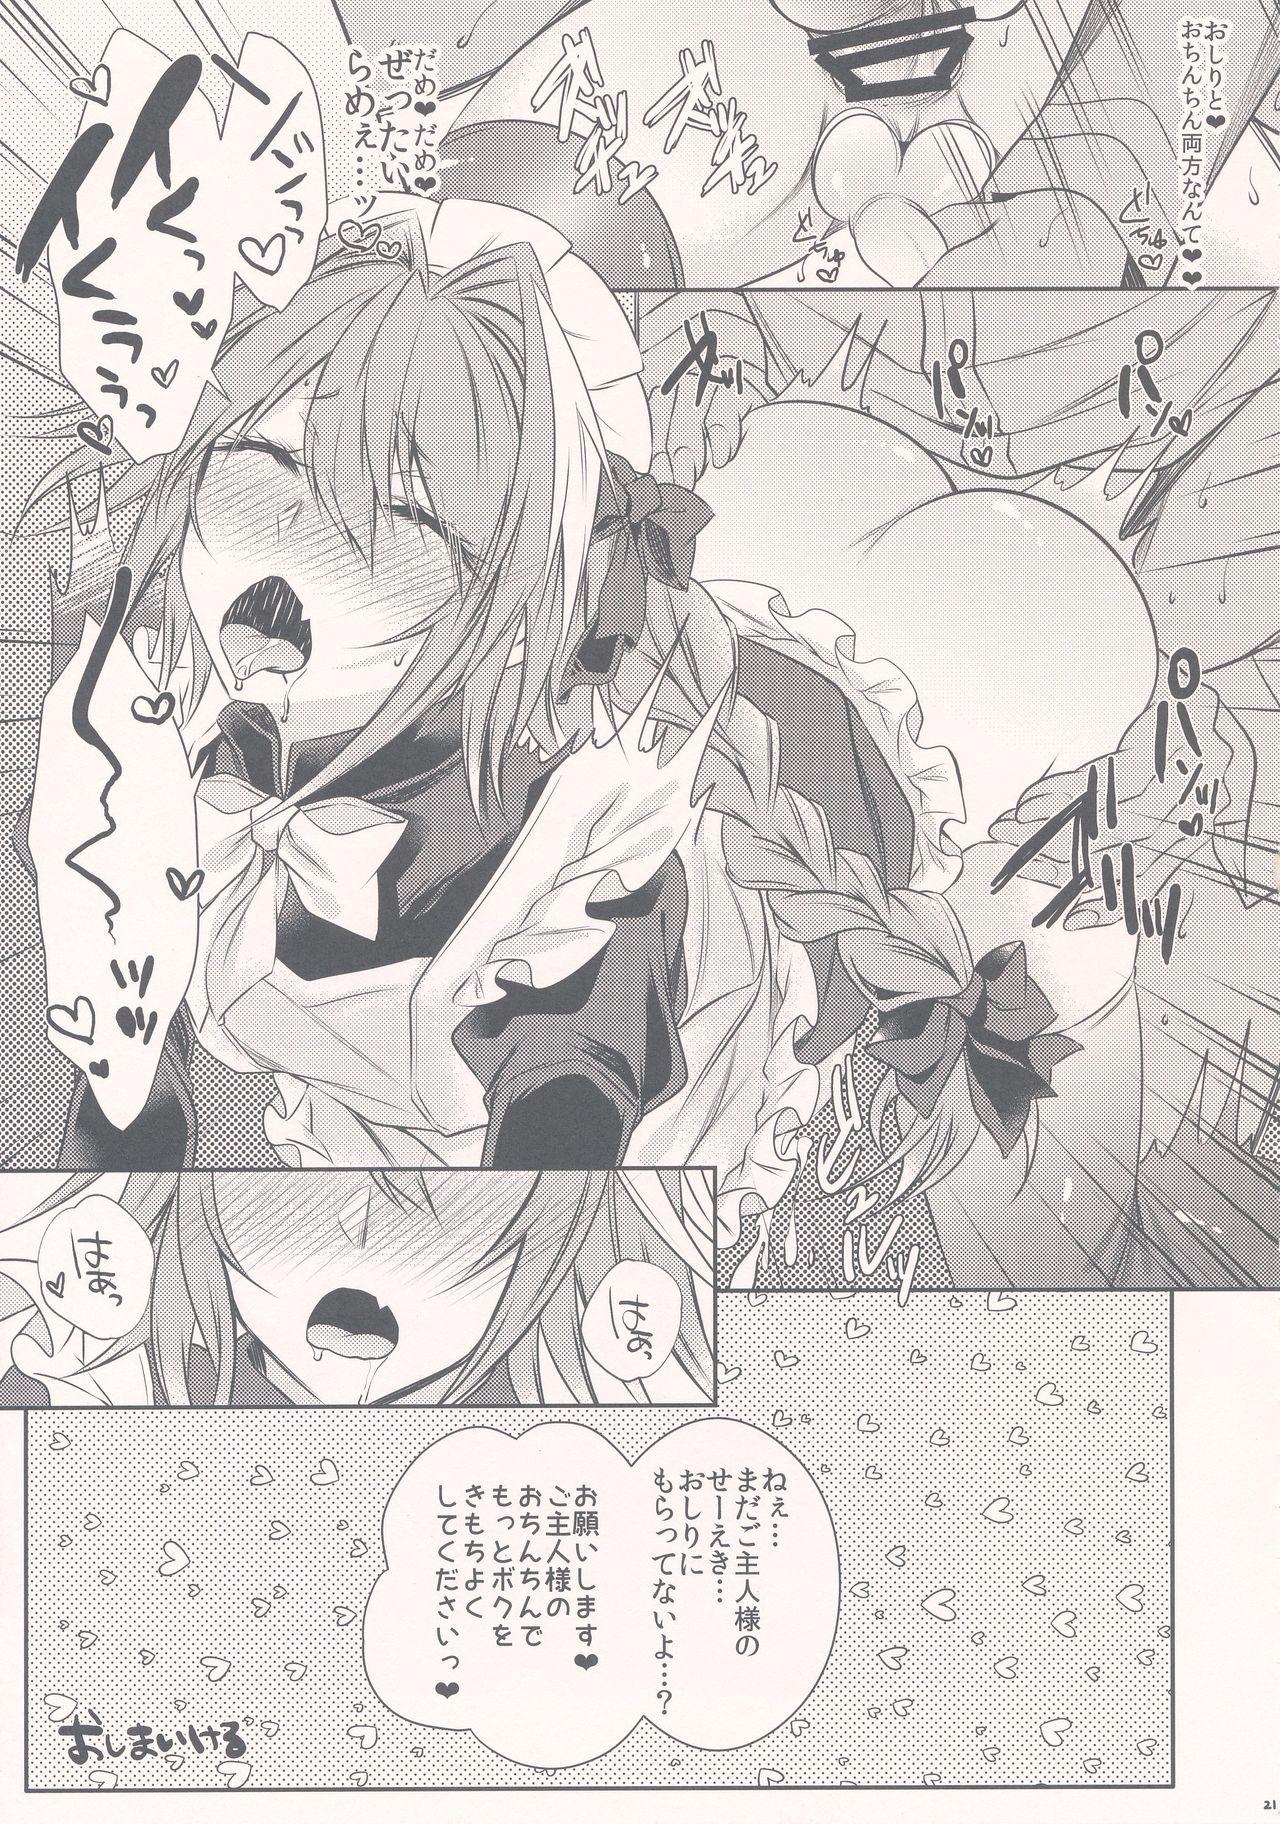 Gapes Gaping Asshole Meido in Astolfo - Fate grand order Horny Slut - Page 21